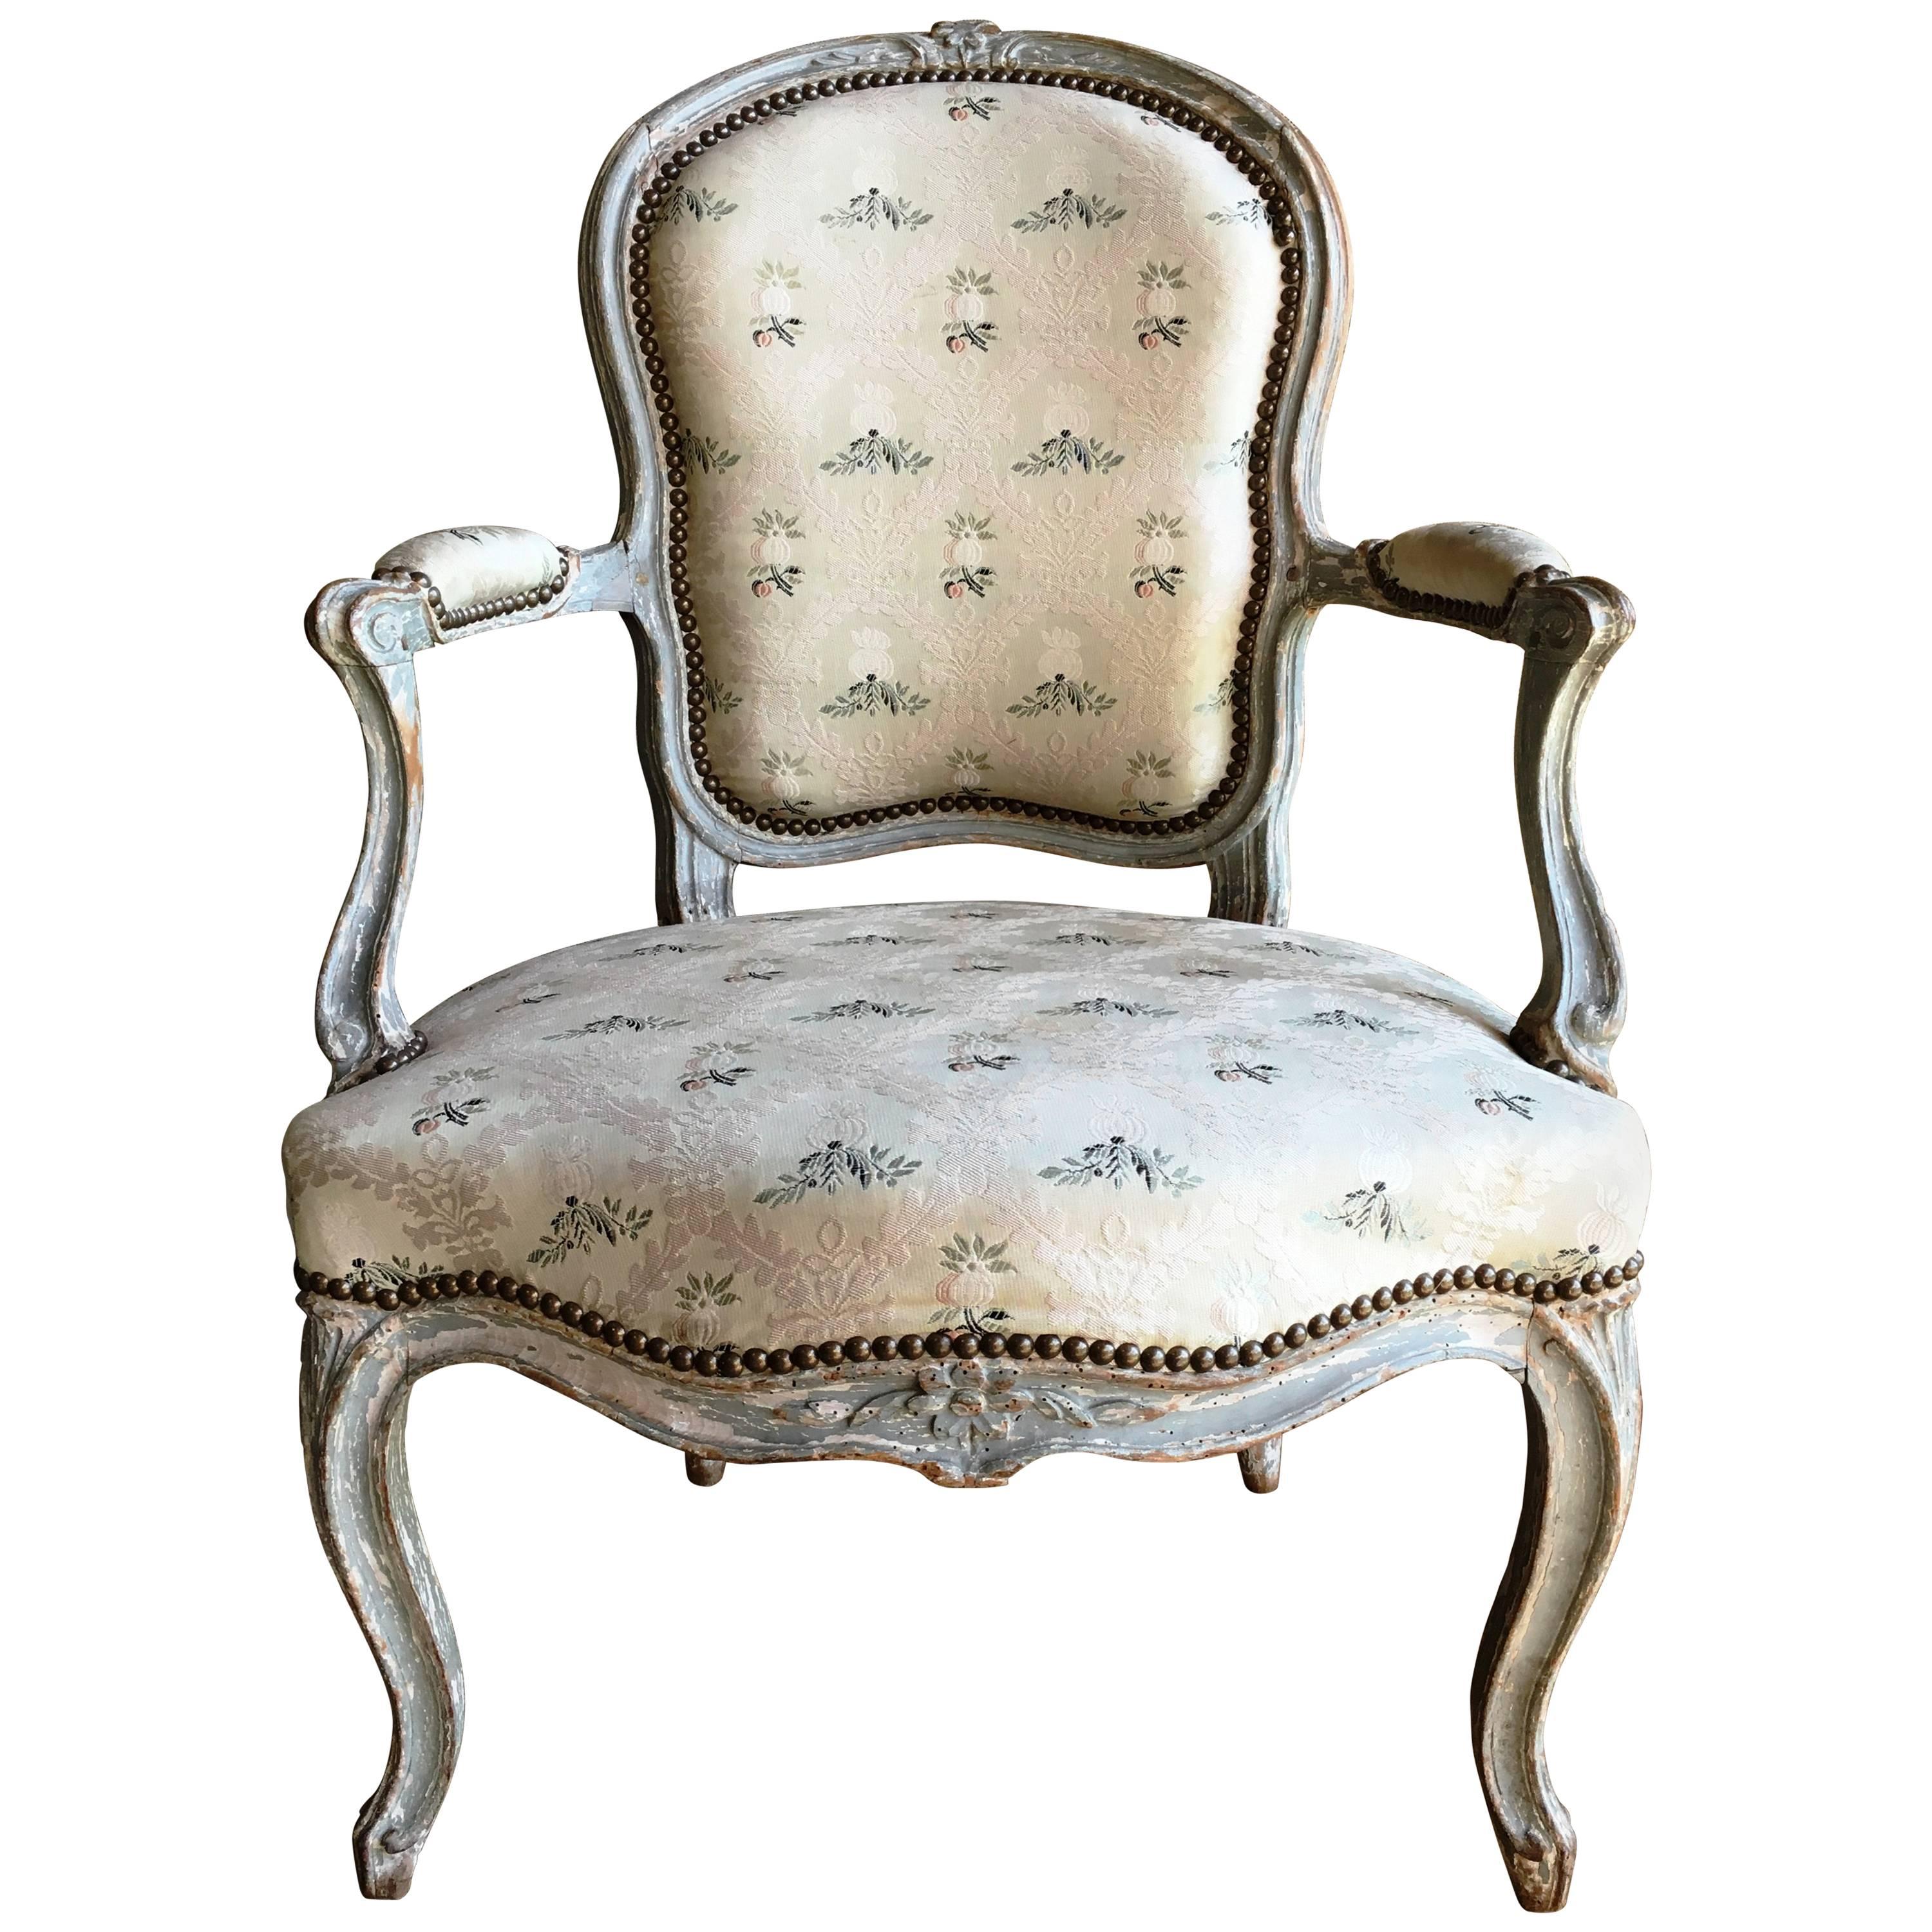 Louis XV Fauteuil Cabriolet, Signed "Nadal L'Aine", circa 1760